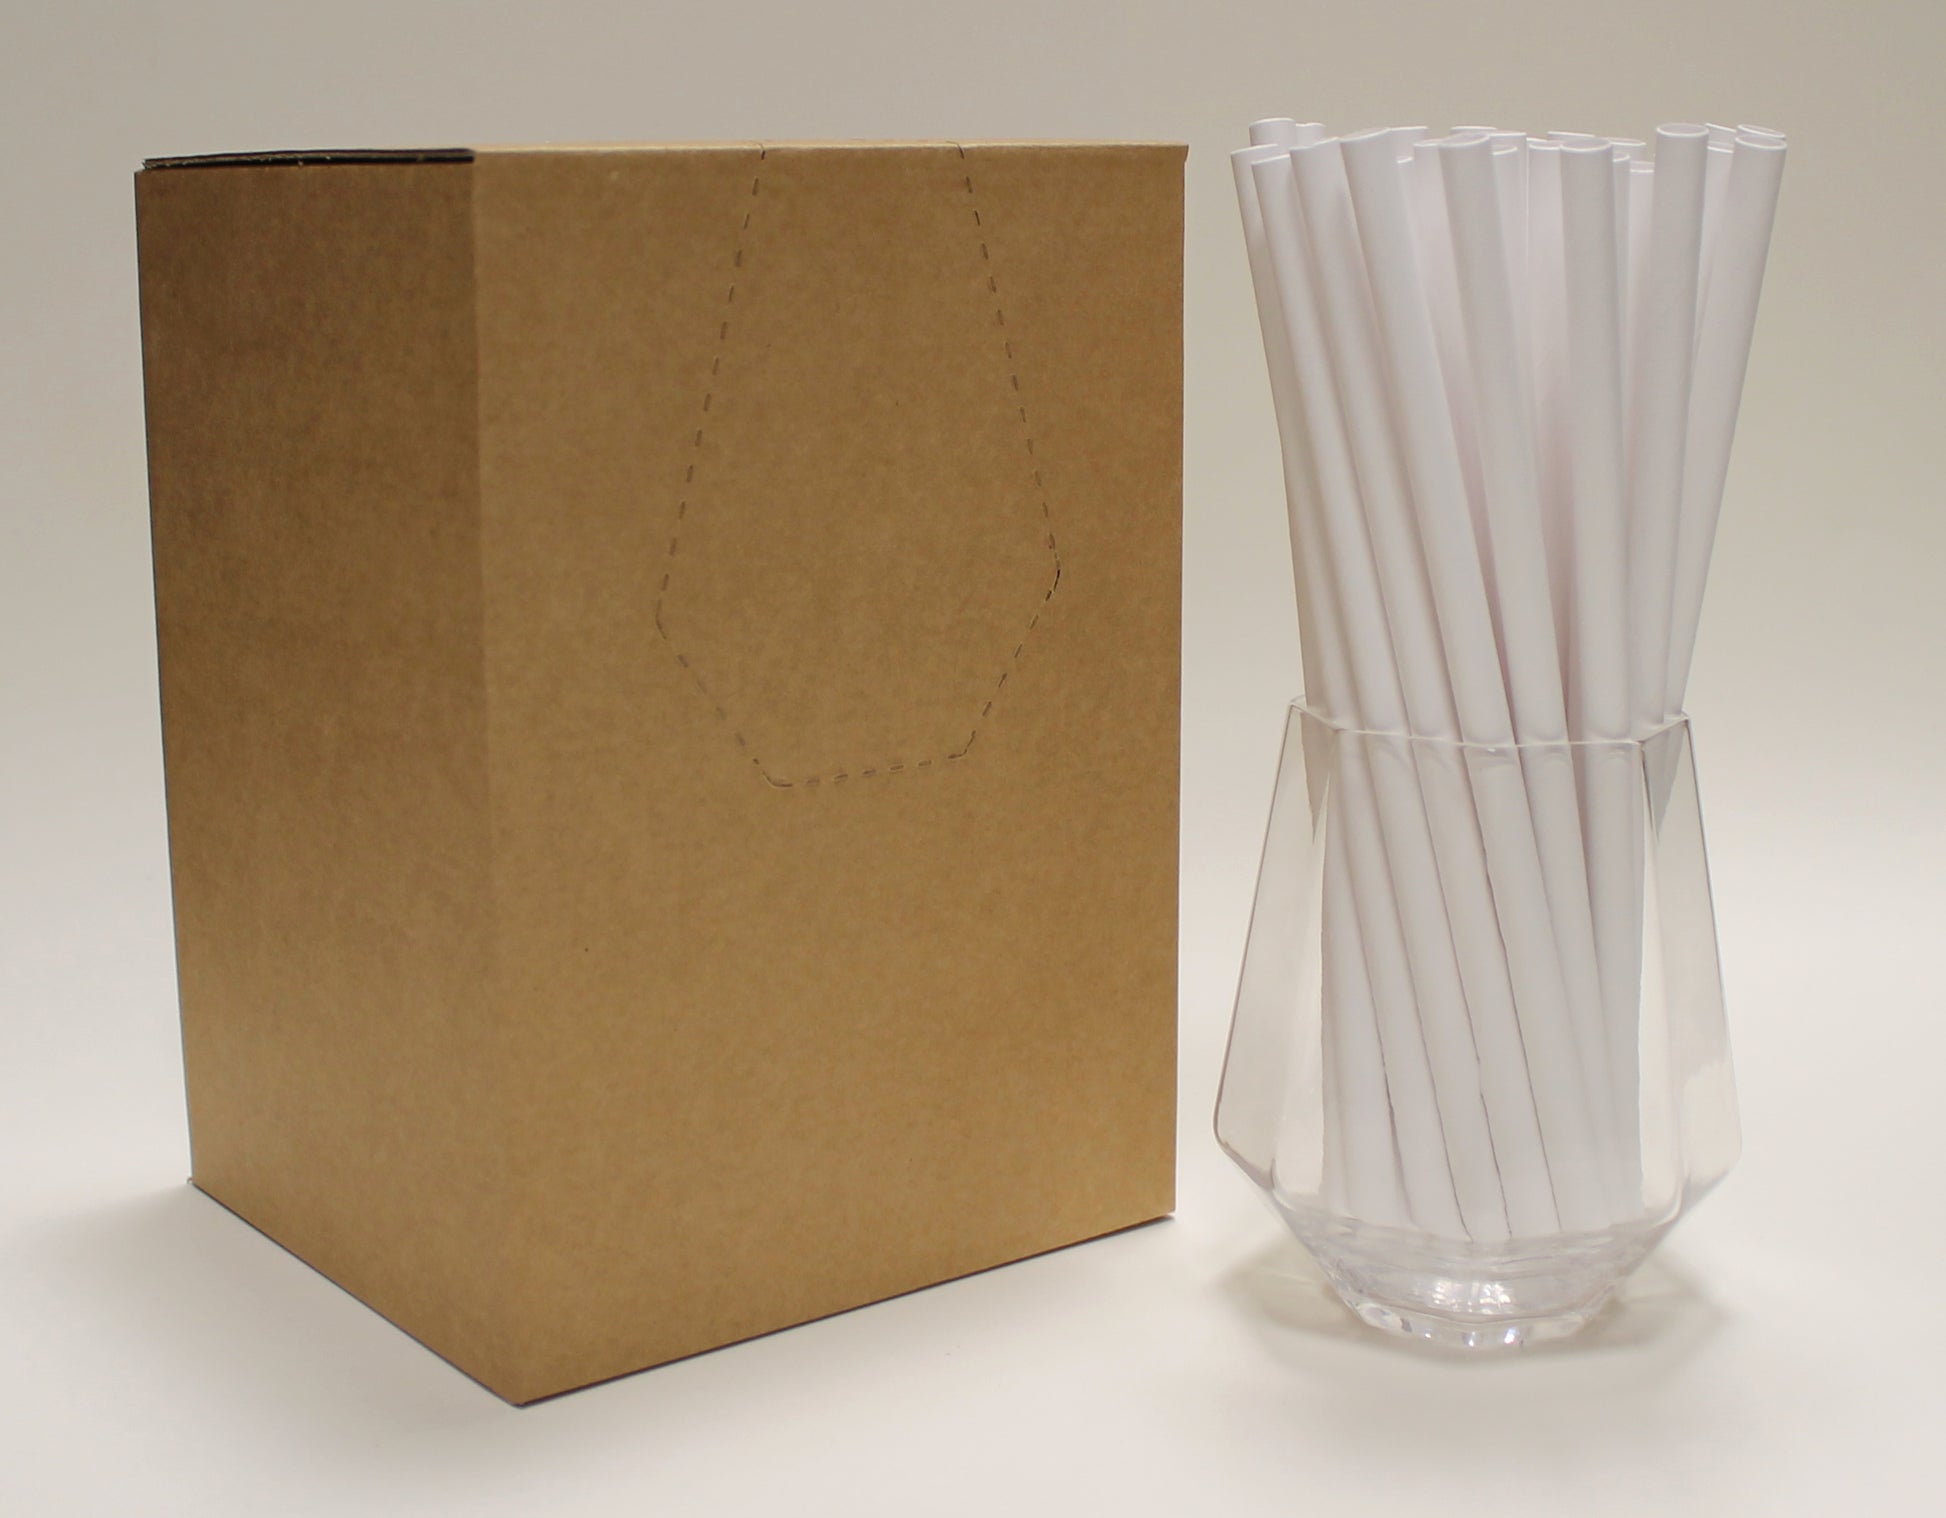 White Paper Straws (10mm x 200mm) - Quality Drinking Straws for Smoothies and Milkshakes - Intrinsic Paper Straws